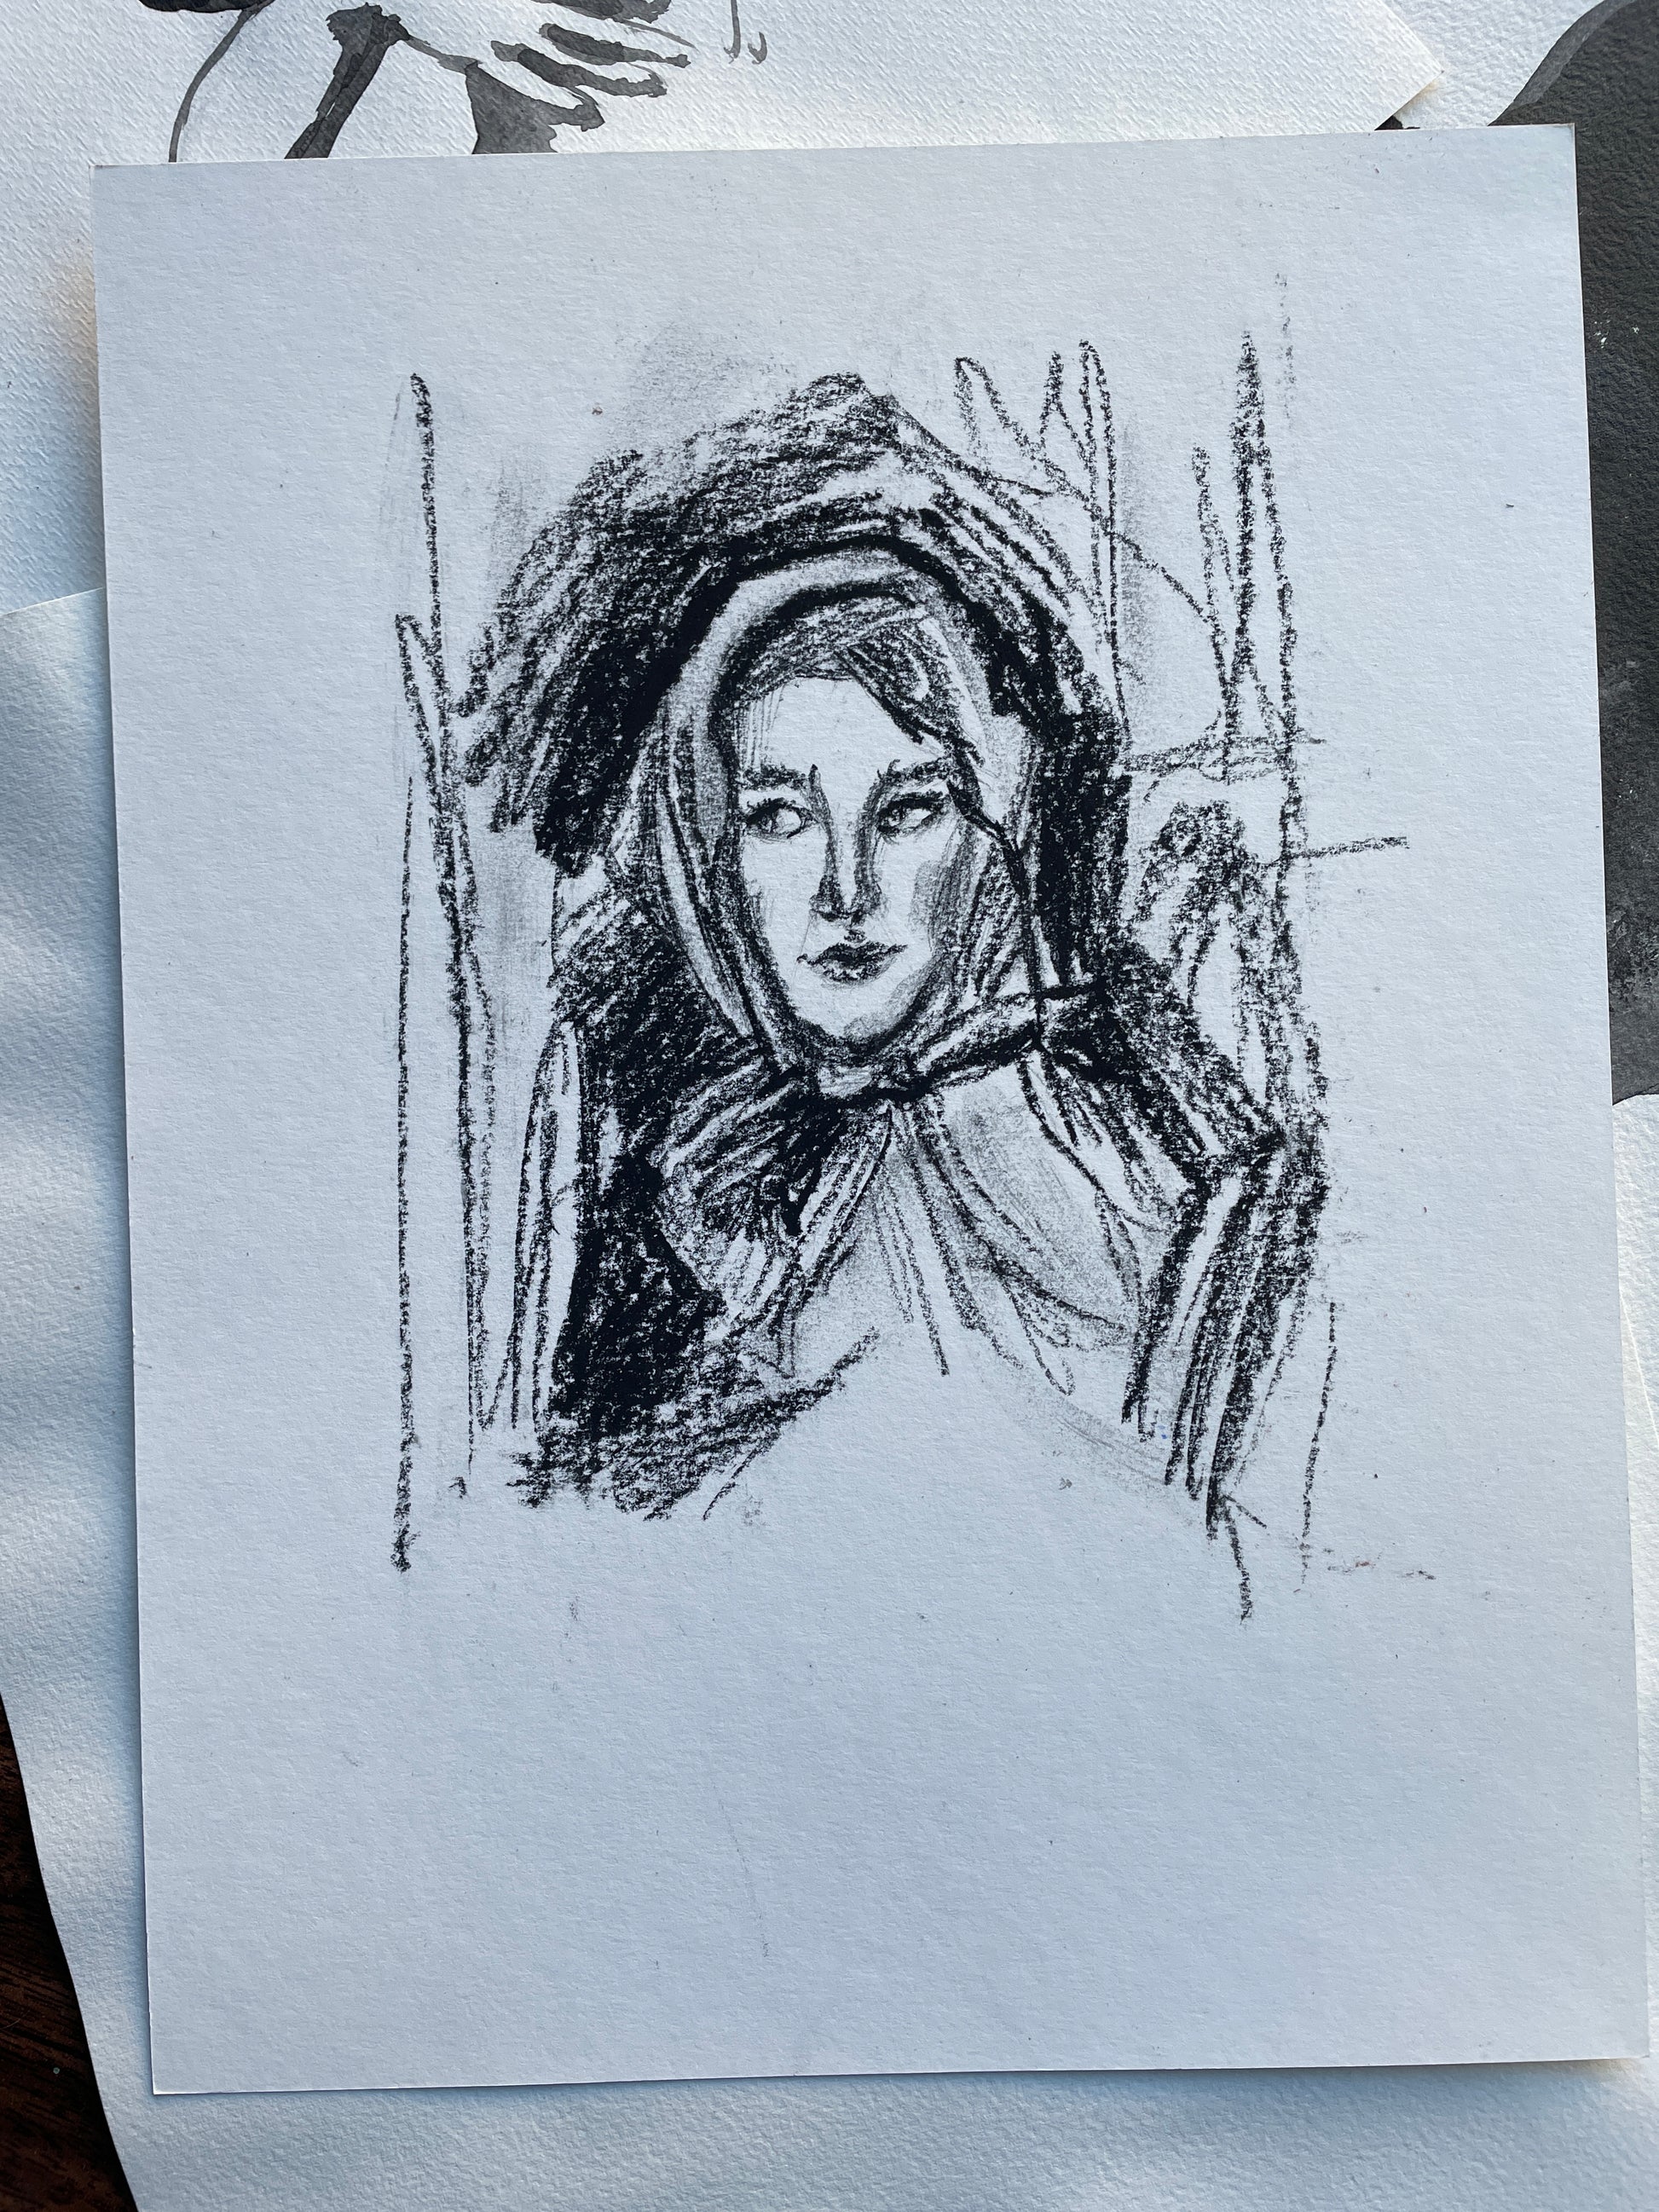 Sketch-like portrait of a young woman in black and white